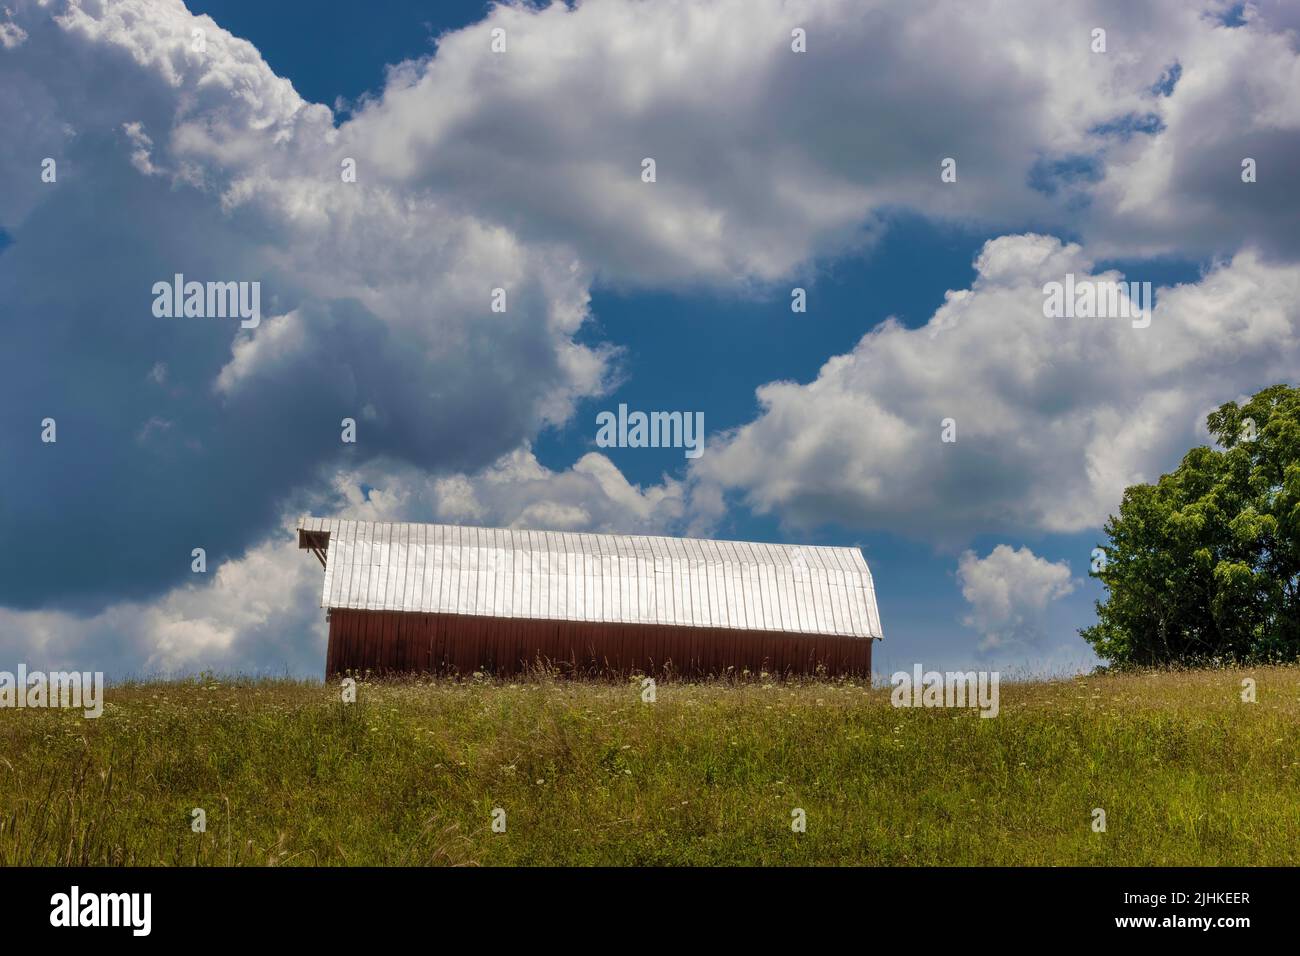 Barn on top of a hill under cloudy skies in the agricultural landscape in rural Tennessee Stock Photo